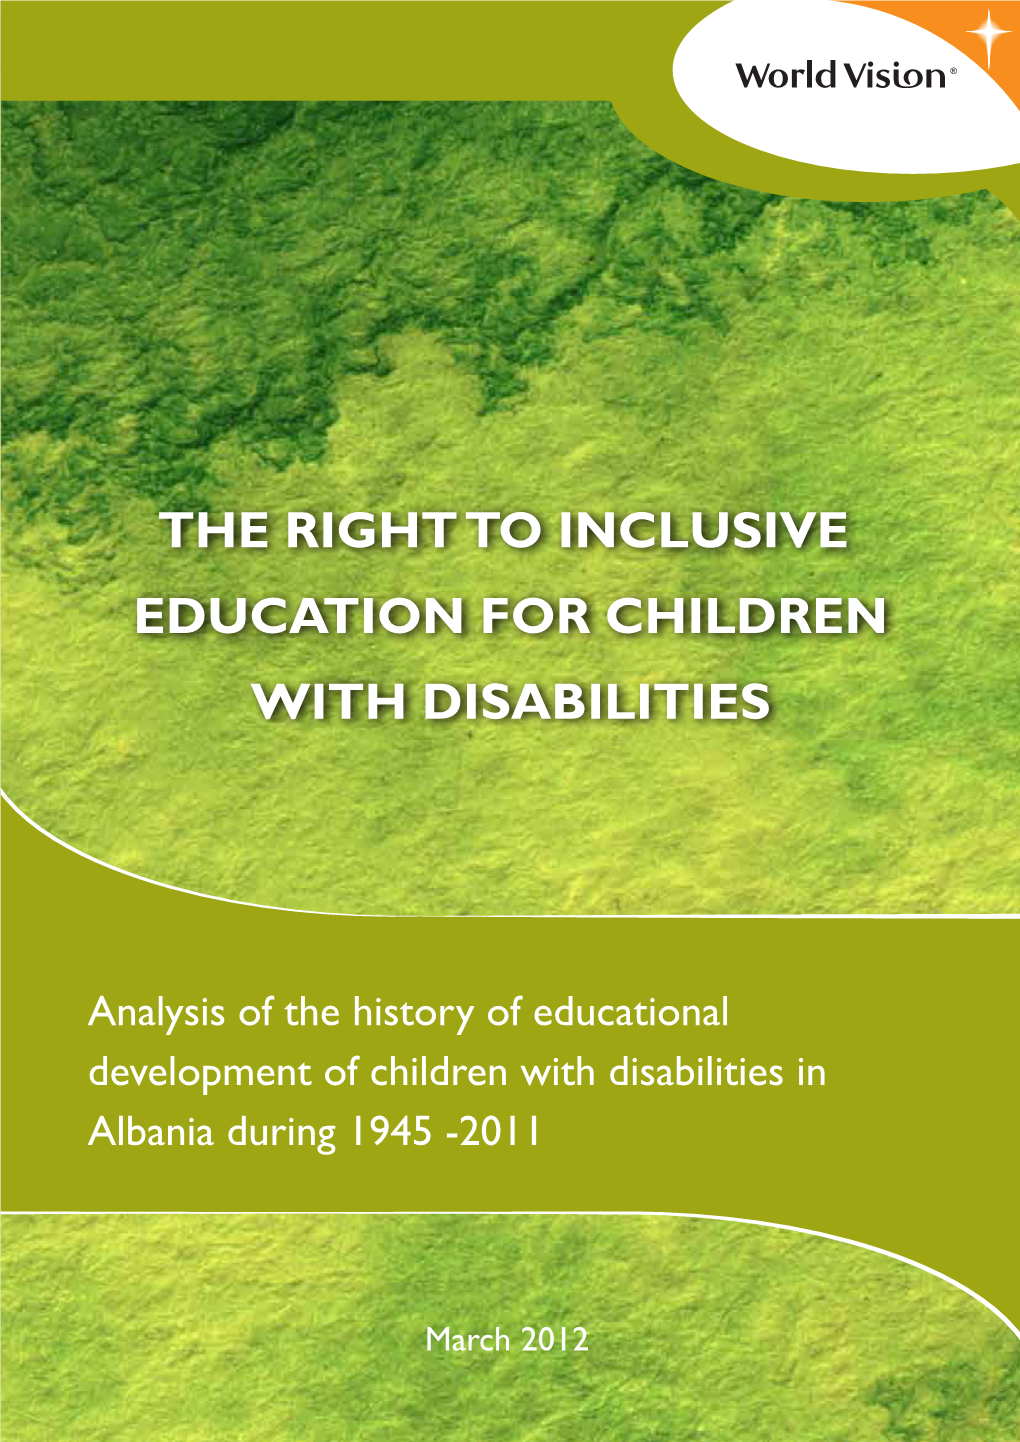 The Right to Inclusive Education for Children with Disabilities